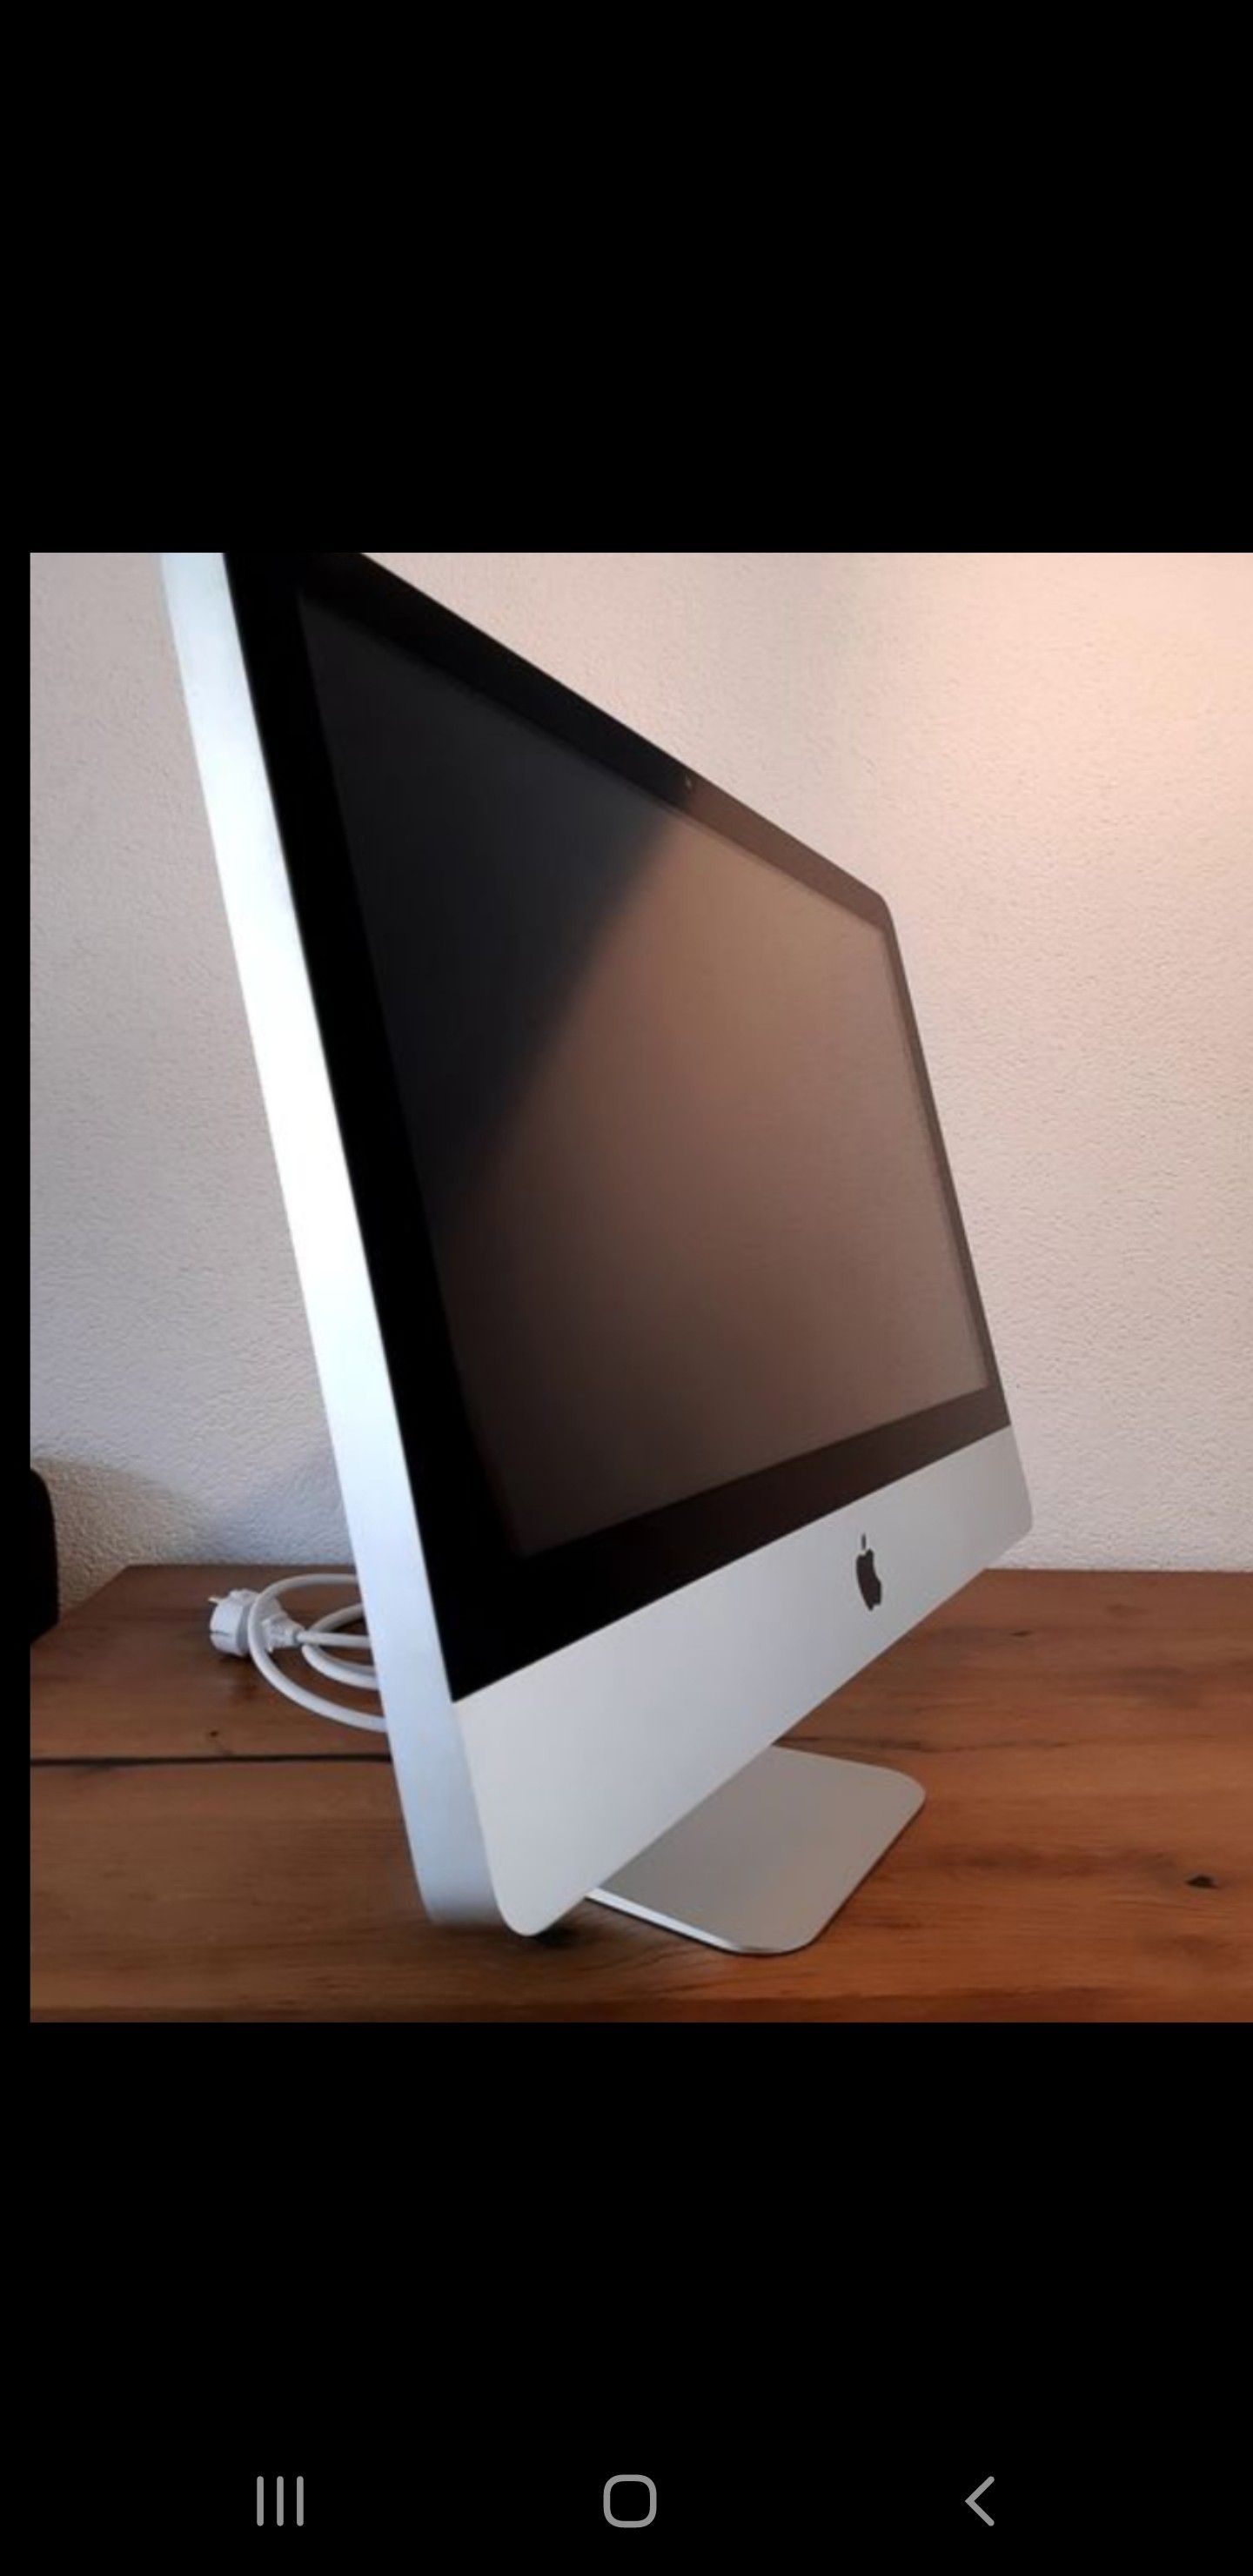 Apple iMac (3pic-computers from 15in to 24in ), all Sold As-Is for price $50 x e/pic = $150 for All/3 computers